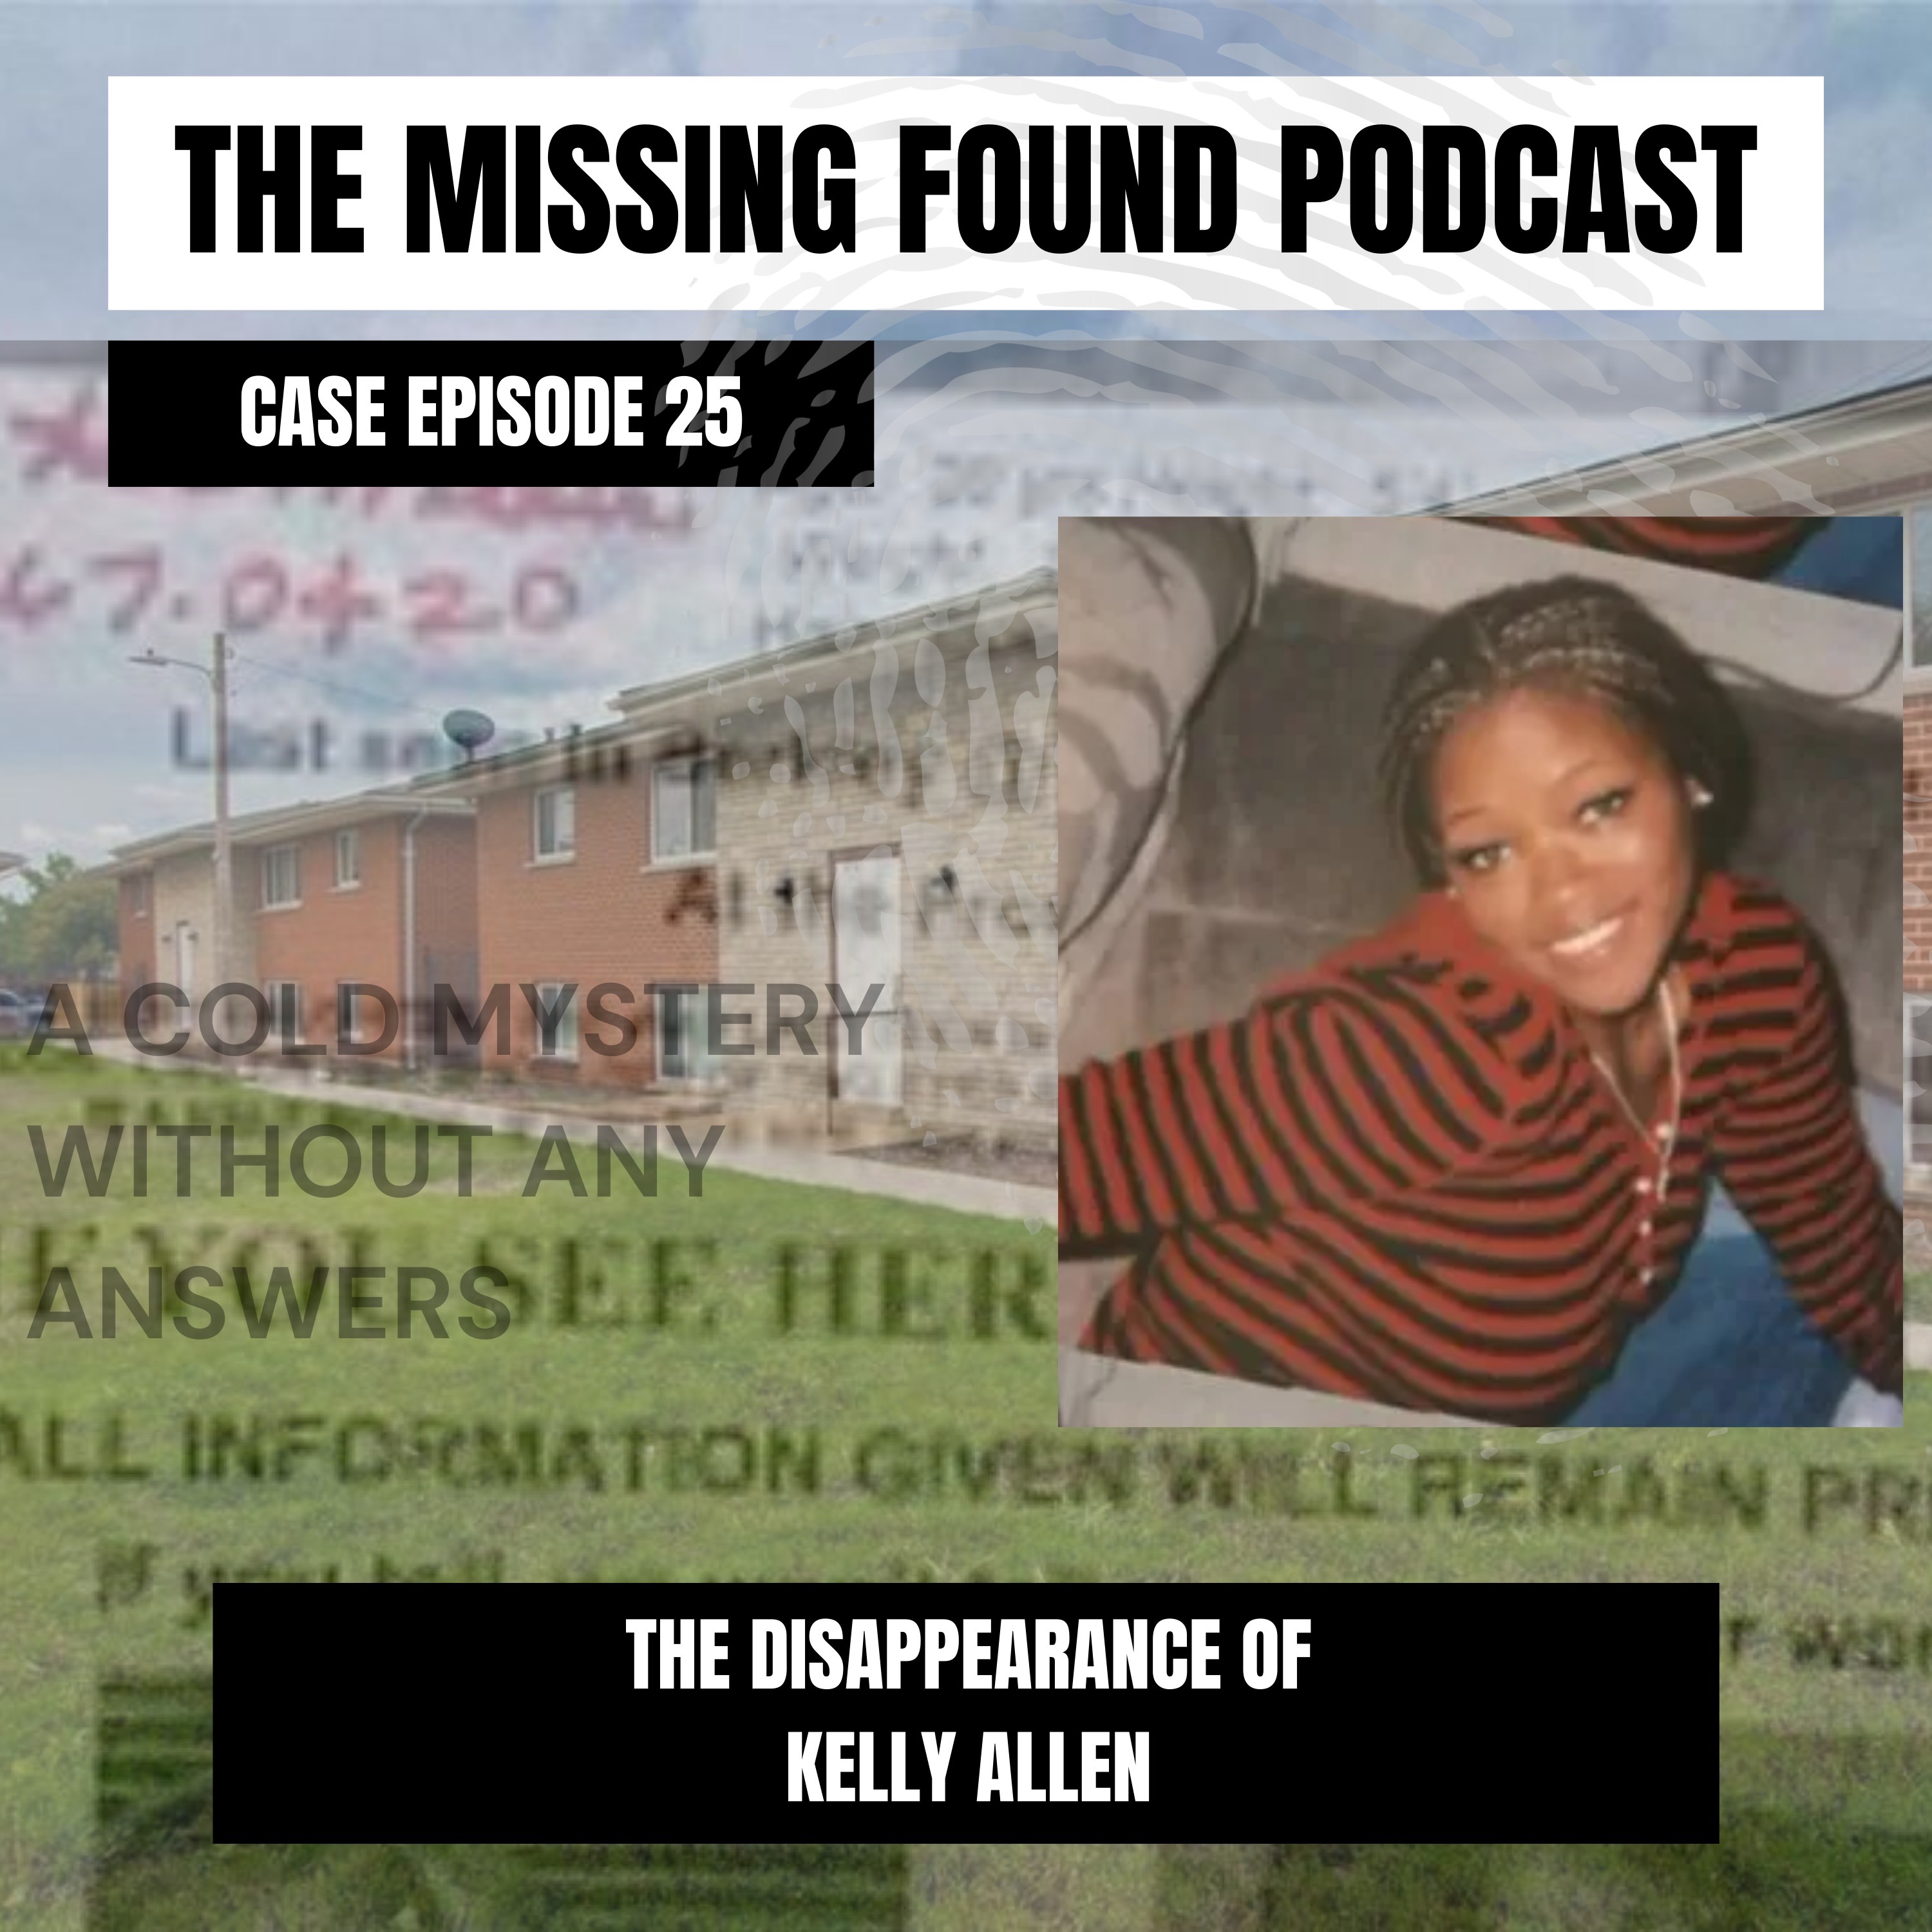 Case Episode 25 | Kelly Allen: A New Beginning that Led to Nearly 20 Years of Cold Mystery